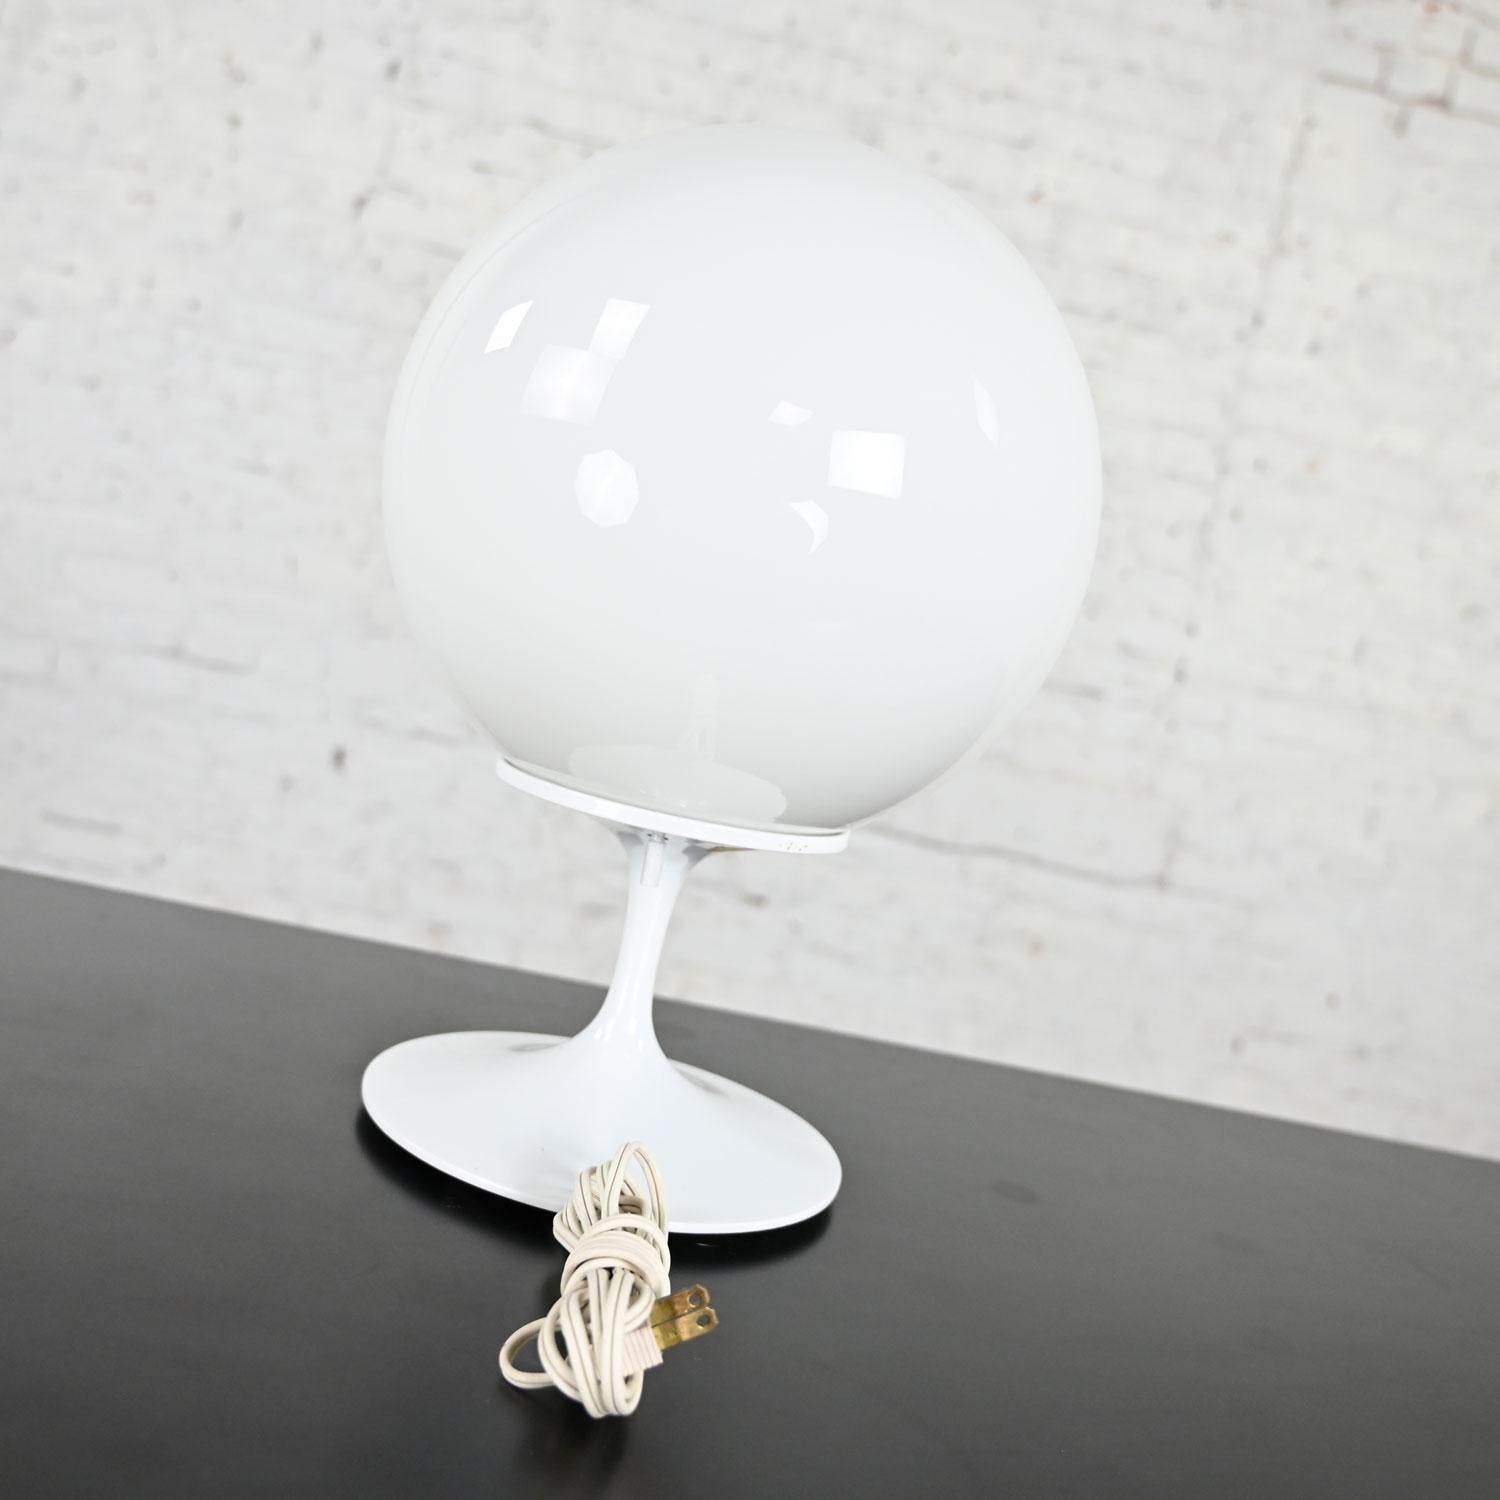 Stemlite Opaque White Glass Ball Shade Table Lamp by Bill Curry for Design Line In Good Condition For Sale In Topeka, KS